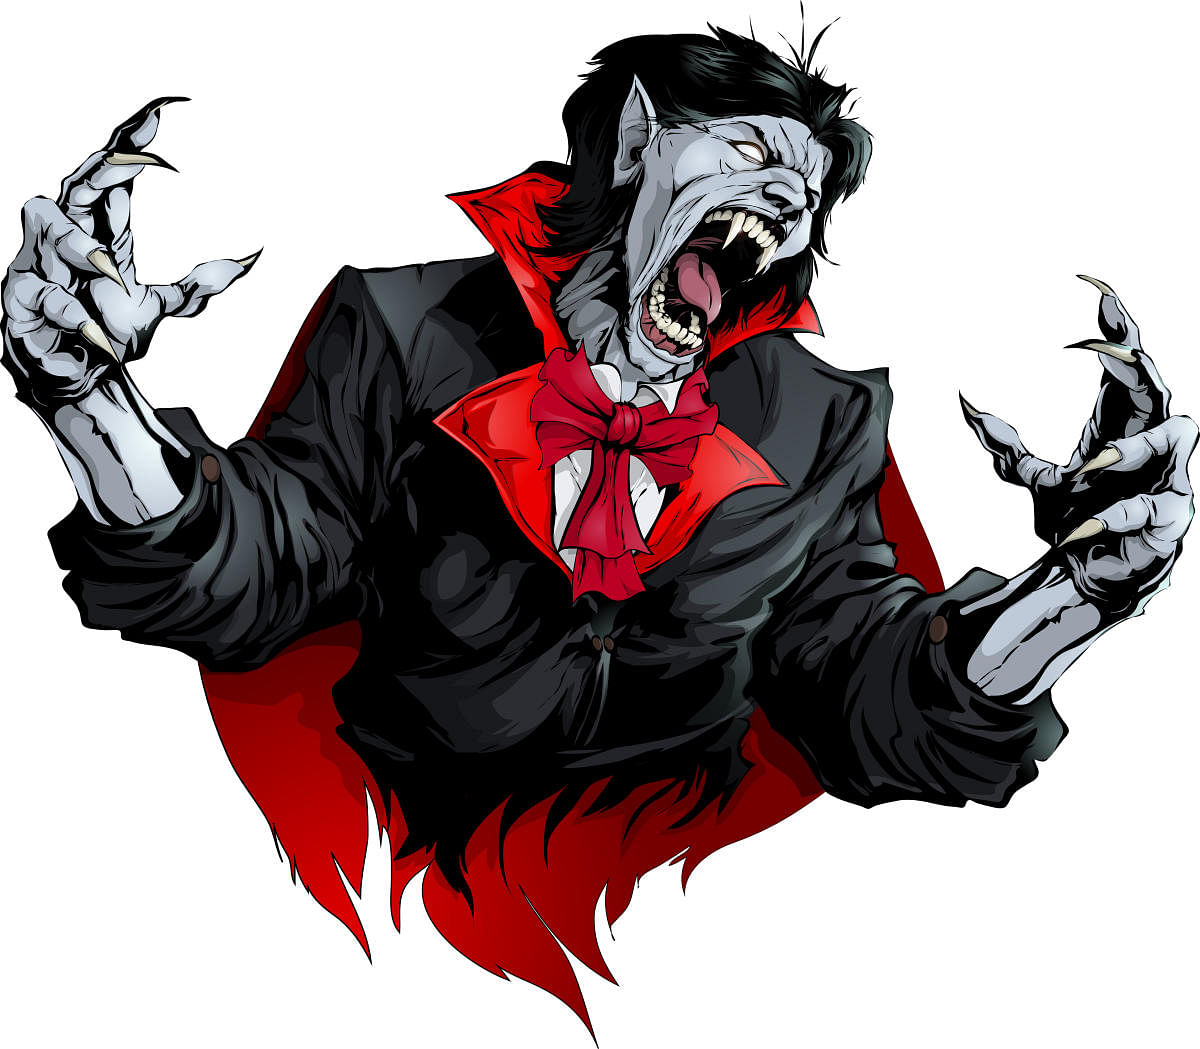 A depiction of the vampire Dracula.